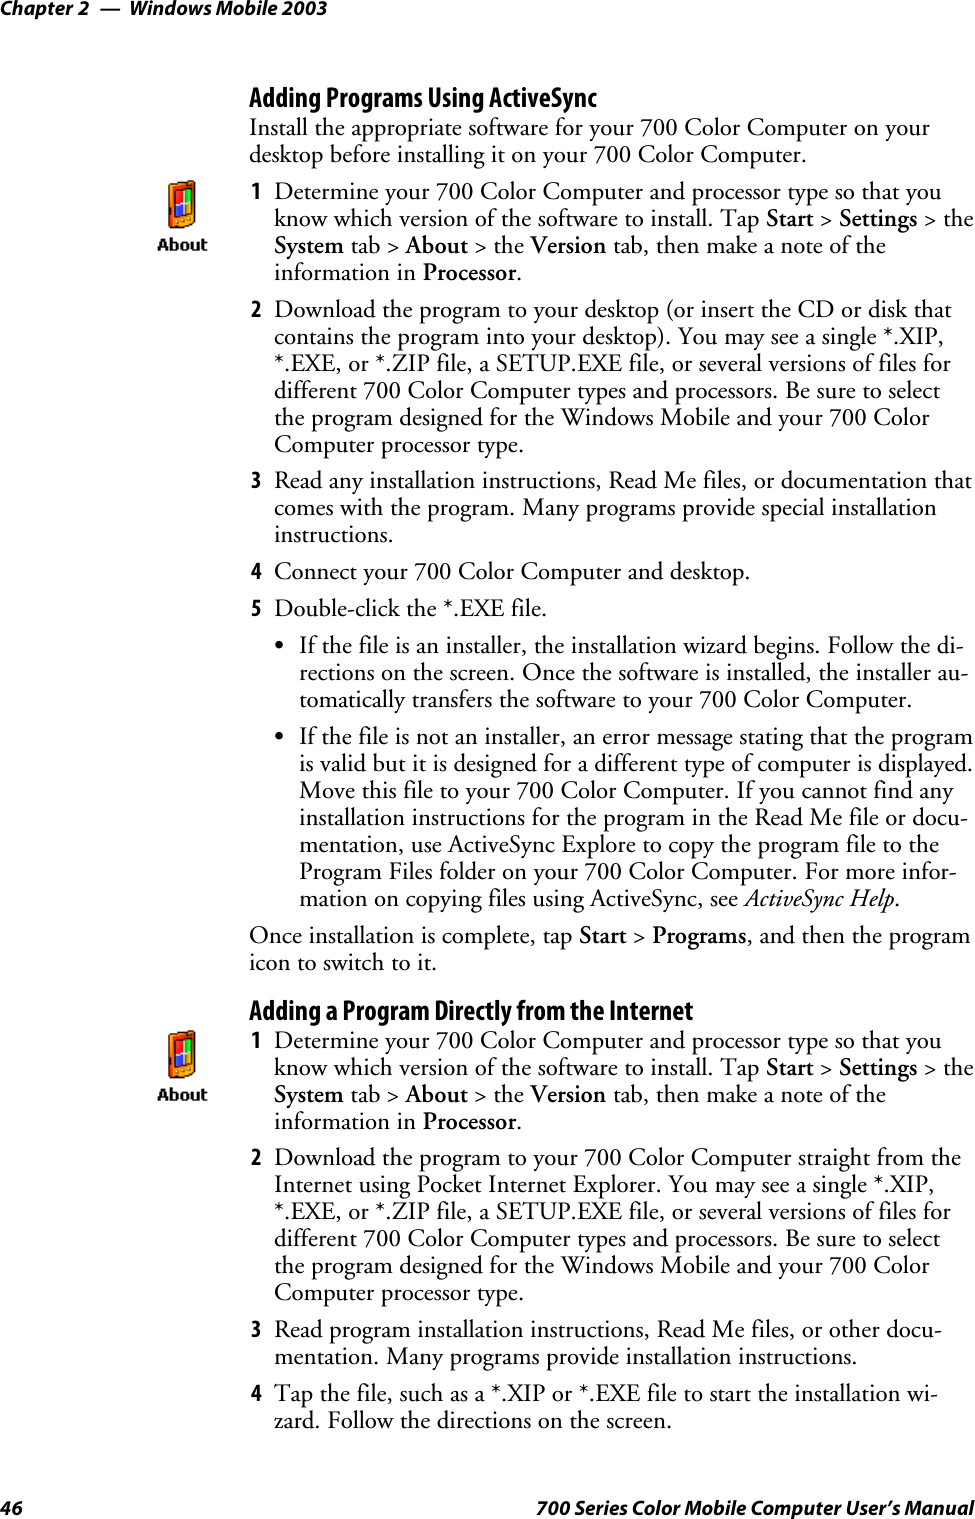 Windows Mobile 2003Chapter —246 700 Series Color Mobile Computer User’s ManualAdding Programs Using ActiveSyncInstall the appropriate software for your 700 Color Computer on yourdesktop before installing it on your 700 Color Computer.1Determine your 700 Color Computer and processor type so that youknow which version of the software to install. Tap Start &gt;Settings &gt;theSystem tab &gt; About &gt;theVersion tab, then make a note of theinformation in Processor.2Download the program to your desktop (or insert the CD or disk thatcontains the program into your desktop). You may see a single *.XIP,*.EXE, or *.ZIP file, a SETUP.EXE file, or several versions of files fordifferent 700 Color Computer types and processors. Be sure to selectthe program designed for the Windows Mobile and your 700 ColorComputer processor type.3Read any installation instructions, Read Me files, or documentation thatcomes with the program. Many programs provide special installationinstructions.4Connect your 700 Color Computer and desktop.5Double-click the *.EXE file.SIf the file is an installer, the installation wizard begins. Follow the di-rections on the screen. Once the software is installed, the installer au-tomatically transfers the software to your 700 Color Computer.SIf the file is not an installer, an error message stating that the programis valid but it is designed for a different type of computer is displayed.Move this file to your 700 Color Computer. If you cannot find anyinstallation instructions for the program in the Read Me file or docu-mentation, use ActiveSync Explore to copy the program file to theProgram Files folder on your 700 Color Computer. For more infor-mation on copying files using ActiveSync, see ActiveSync Help.Once installation is complete, tap Start &gt;Programs, and then the programicon to switch to it.Adding a Program Directly from the Internet1Determine your 700 Color Computer and processor type so that youknow which version of the software to install. Tap Start &gt;Settings &gt;theSystem tab &gt; About &gt;theVersion tab, then make a note of theinformation in Processor.2Download the program to your 700 Color Computer straight from theInternet using Pocket Internet Explorer. You may see a single *.XIP,*.EXE, or *.ZIP file, a SETUP.EXE file, or several versions of files fordifferent 700 Color Computer types and processors. Be sure to selectthe program designed for the Windows Mobile and your 700 ColorComputer processor type.3Read program installation instructions, Read Me files, or other docu-mentation. Many programs provide installation instructions.4Tap the file, such as a *.XIP or *.EXE file to start the installation wi-zard. Follow the directions on the screen.